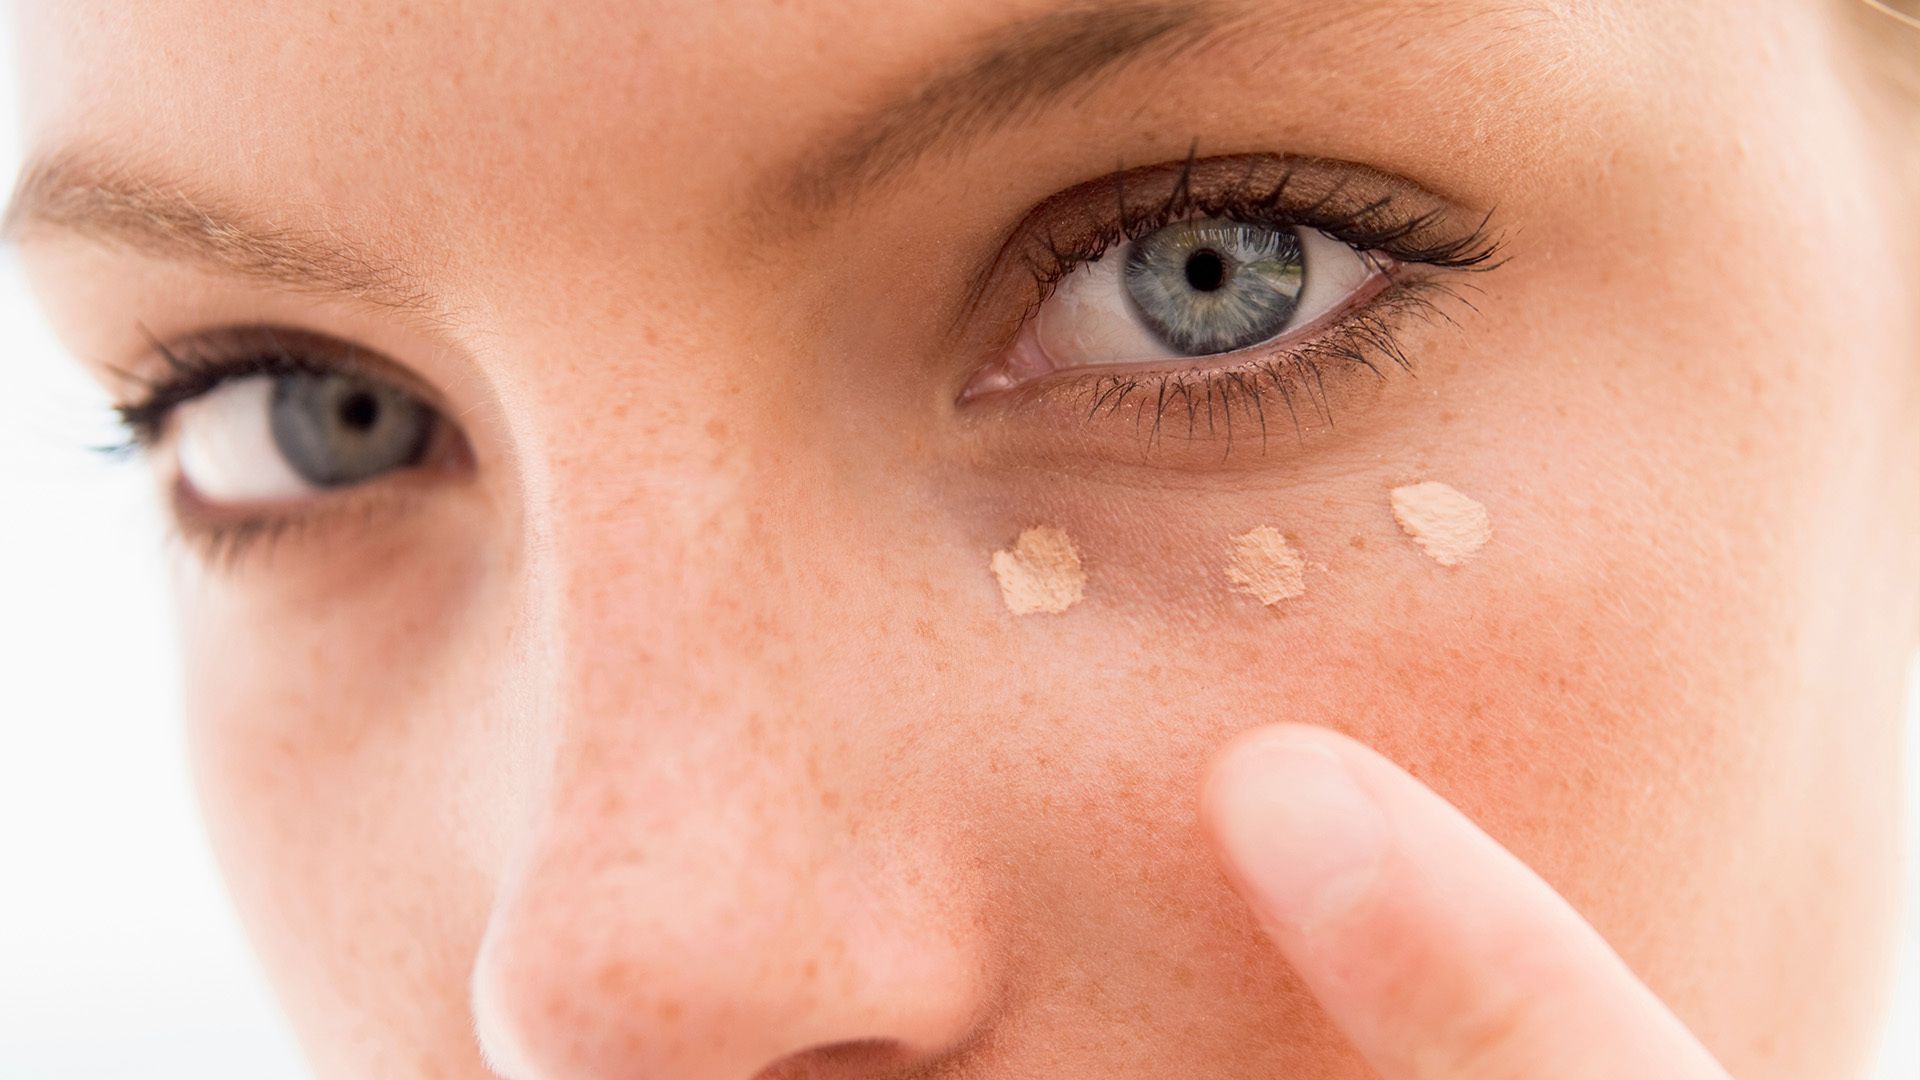 Covering dark circles: 5 typical mistakes